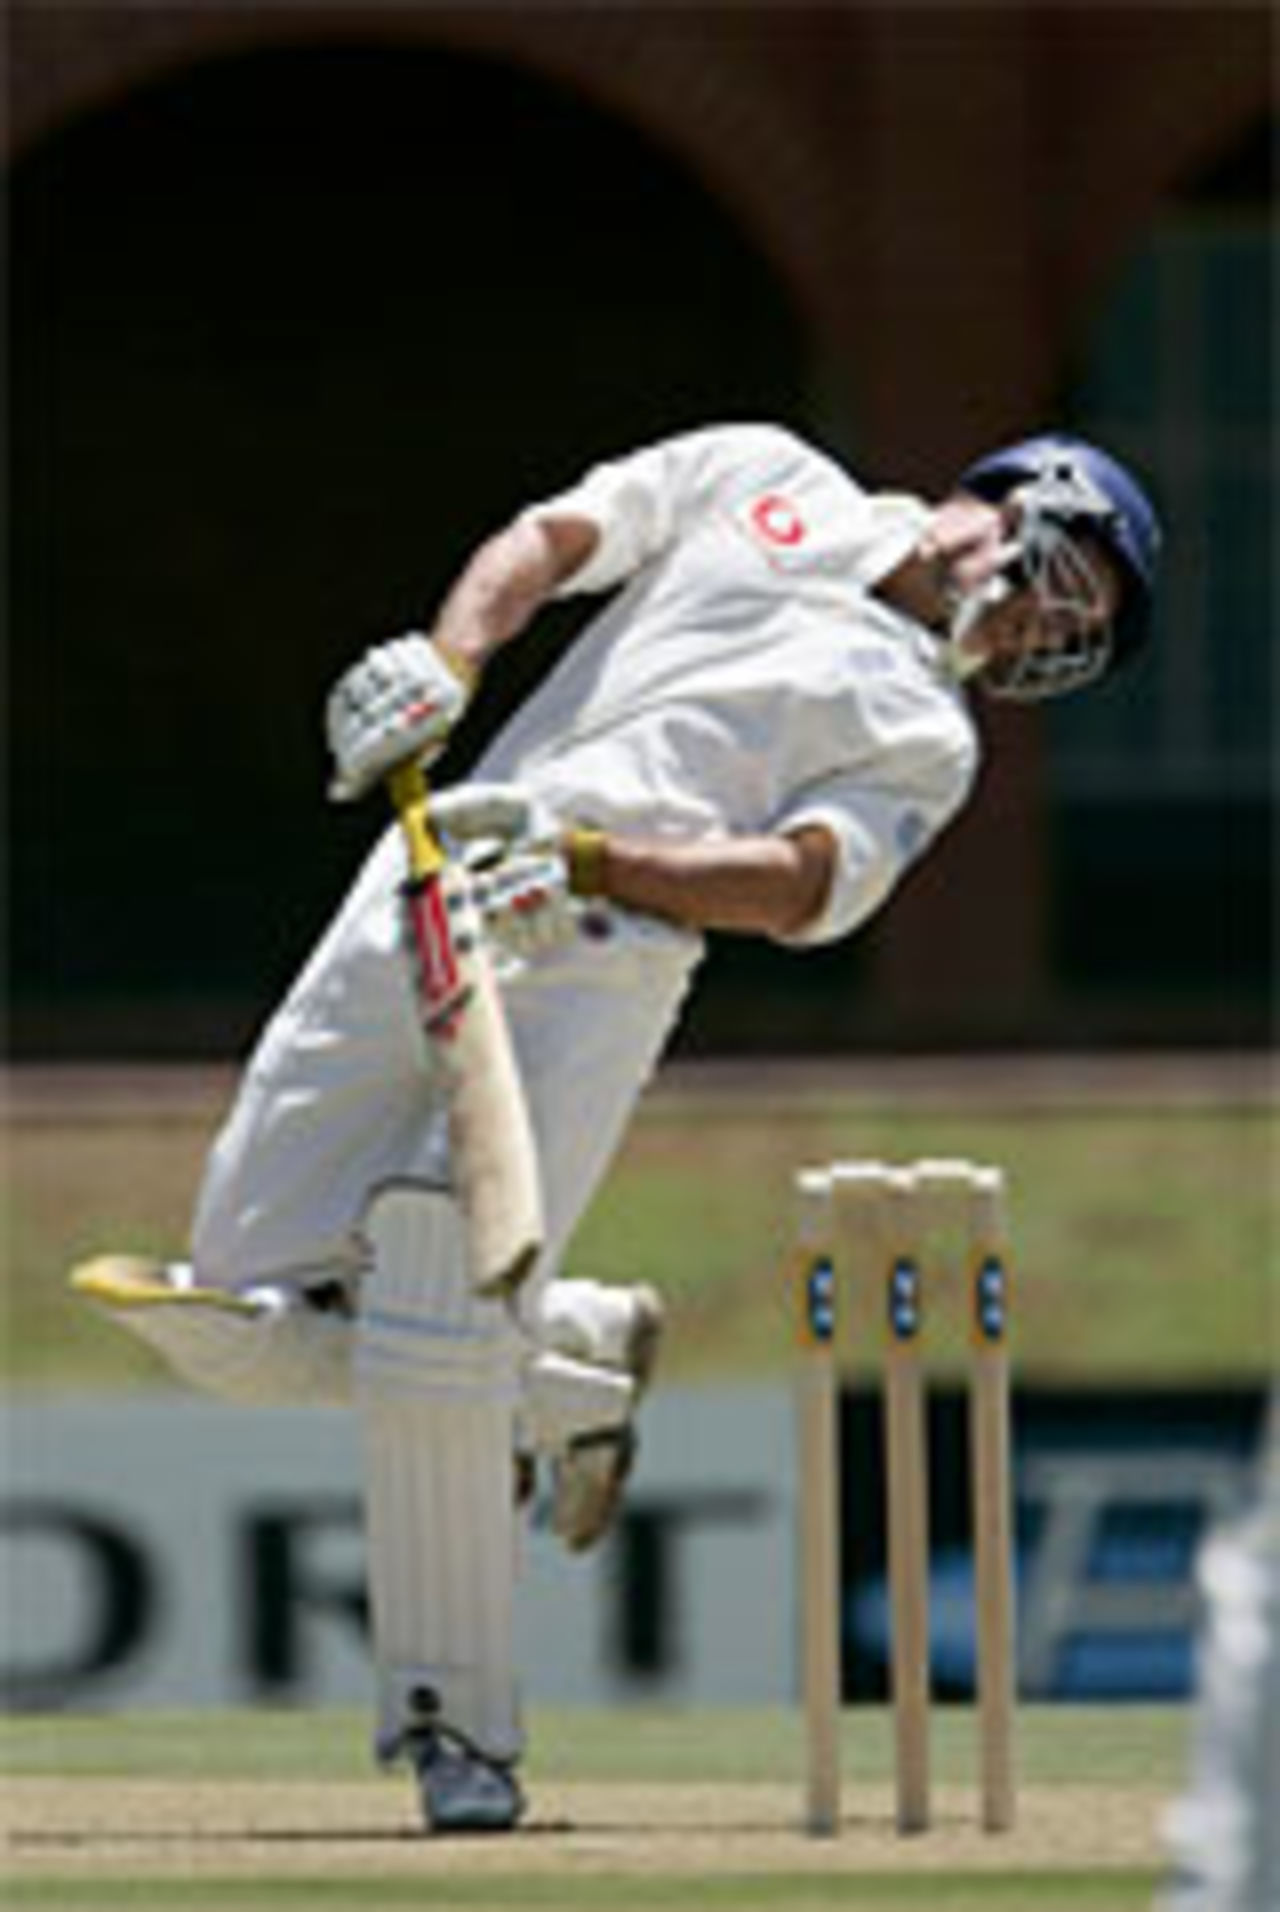 Andrew Strauss swerves to avoid a bouncer, South Africa A v England, Potchefstroom, December 11, 2004